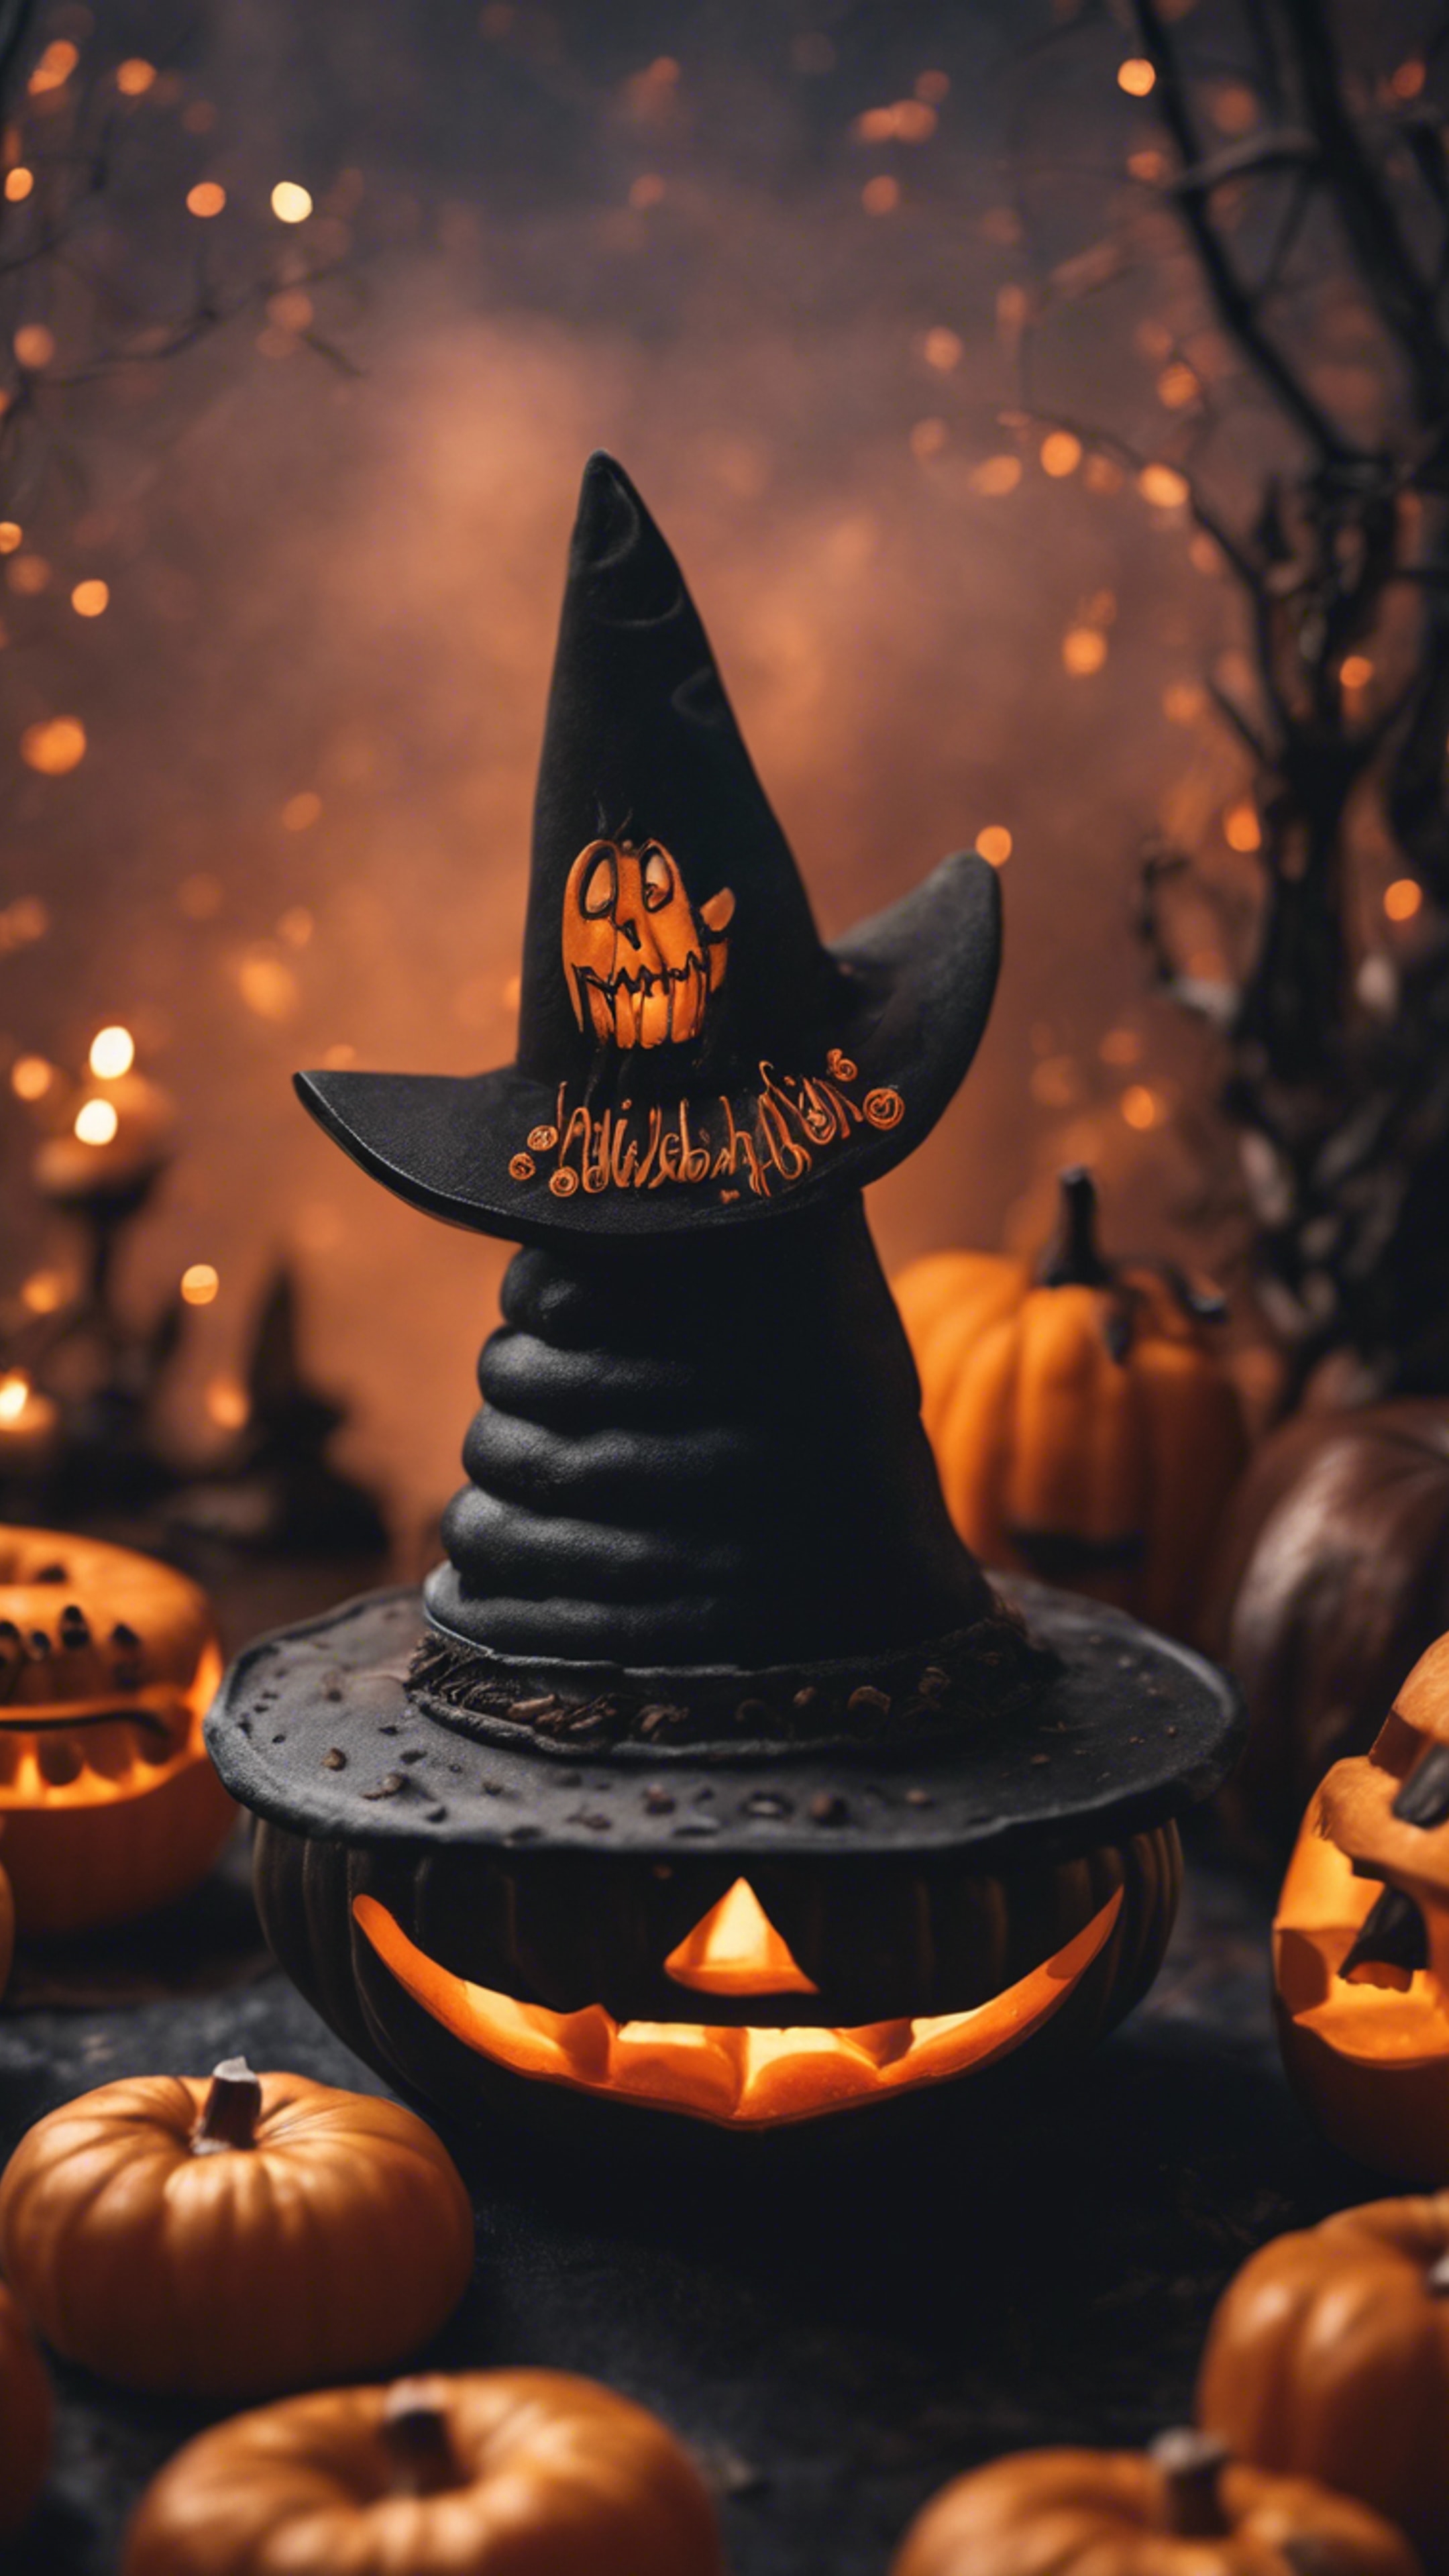 A spooky scene with jack-o-lanterns and a black witch's hat on a pumpkin-spiced donut. Tapet[393956df6a264774b0c0]